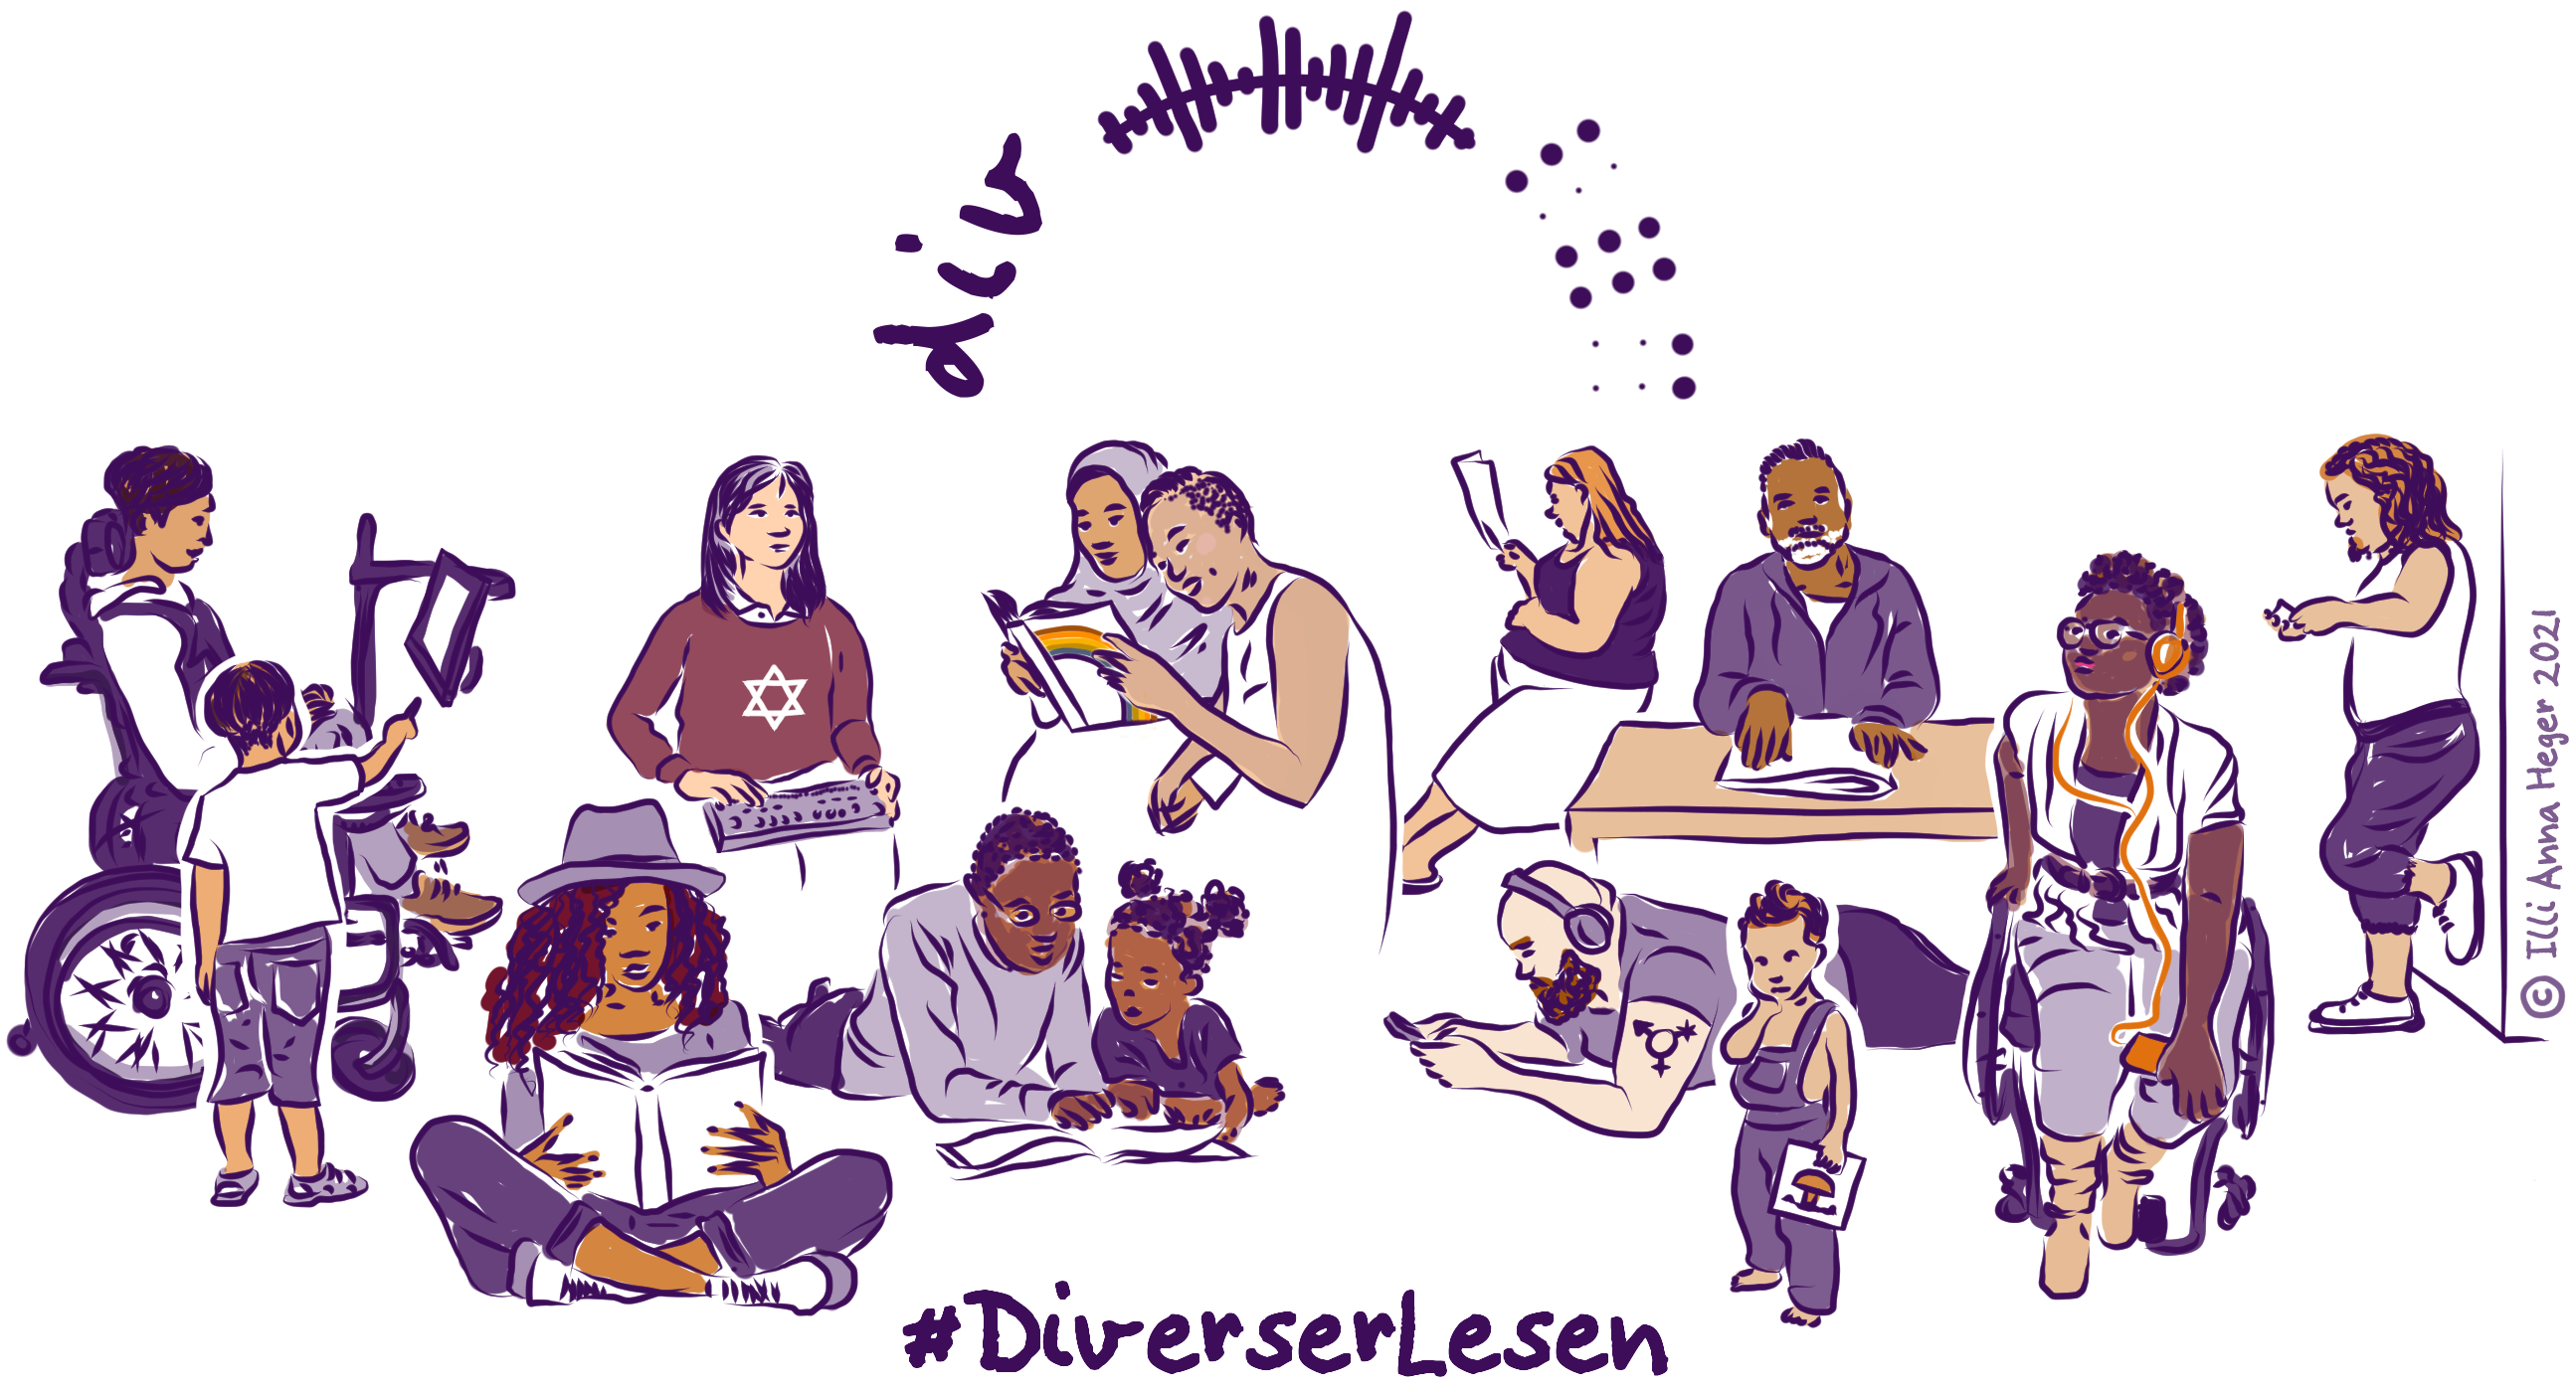 The logo for the challenge #DiverserLesen shows a group of people reading in different ways. The logo was created by Illi Anna Heger as dark violet line art colored in different shades of brown and violet. In the middle above the group are the letters »div«, the symbol for an acoustic signal and in German short Braille the word »lesen«, meaning reading, written with the Braille letters »l % c«. 
The group of people described from left to right: Two people of Color with short black hair. The grown up sits in an electrical wheel chair and navigates the attached screen with their eyes. The child next to them points with their finger to the screen. In front of them a black person reads a book cross-legged and has a hat on their long curly hair. Behind them a person of color reads on an electronic Braille reader on their knees. Their long hair is cut with bangs and on their sweater a Star of David in knitted in.
Two black persons read a book together while lying on the floor. The grown up wears their curls short and has glasses. the child wears their hair in Afro-puffs. Two people of color hold hands and read a printed book together, one of them wears a hijab and the other her dark hear with an undercut. A white person with skirt and long blond hair reads a huge printed magazine. She leans a against a table where a white haired black person sits and reads Braille on paper. In front of the table lies a white person with bald head, beard, a genderqueer tattoo on their upper arm, with headphone and mobile in their hands. In front of them a three year old kid with overalls and an picture book in their hands. On the right, a black person with a short Afro, sitting in a manual wheel chair. Their mobile on their lab, the listen to a book on their headphone. At the far right, a white person with shoulder length hair and a blond beard, reading a zine. They are short of stature..